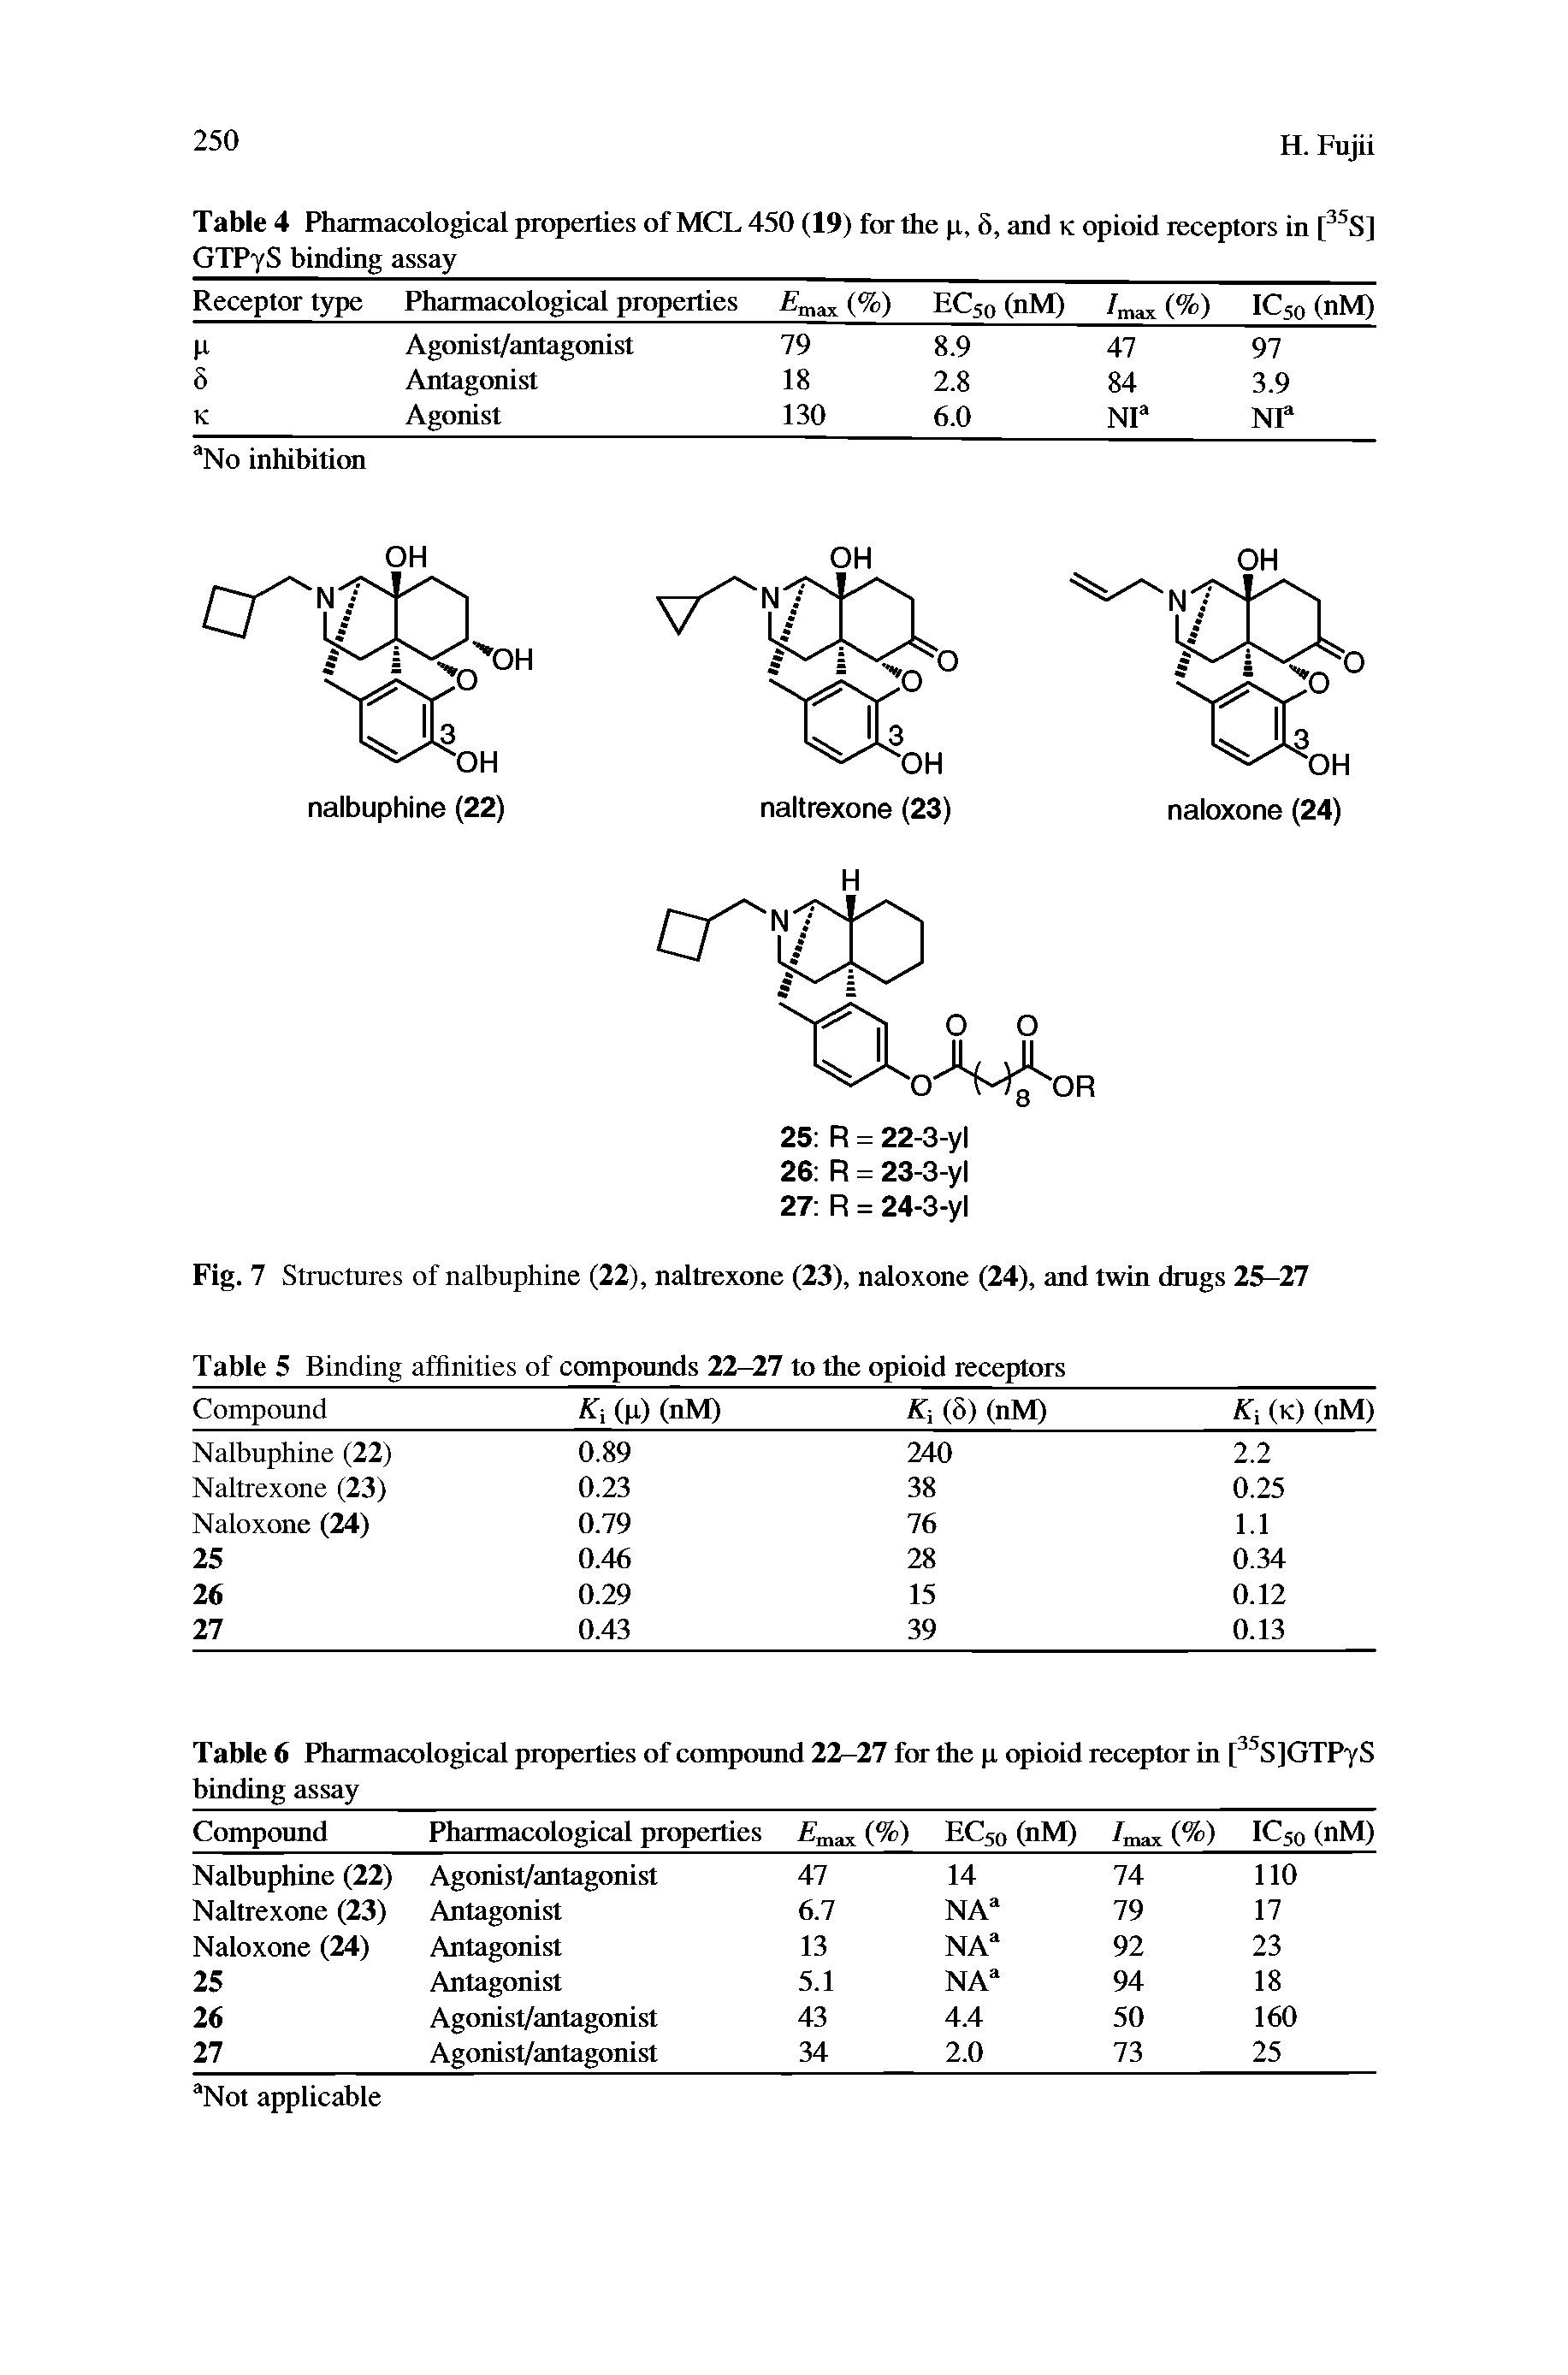 Fig. 7 Structures of nalbuphine (22), naltrexone (23), naloxone (24), and twin drugs 25-27...